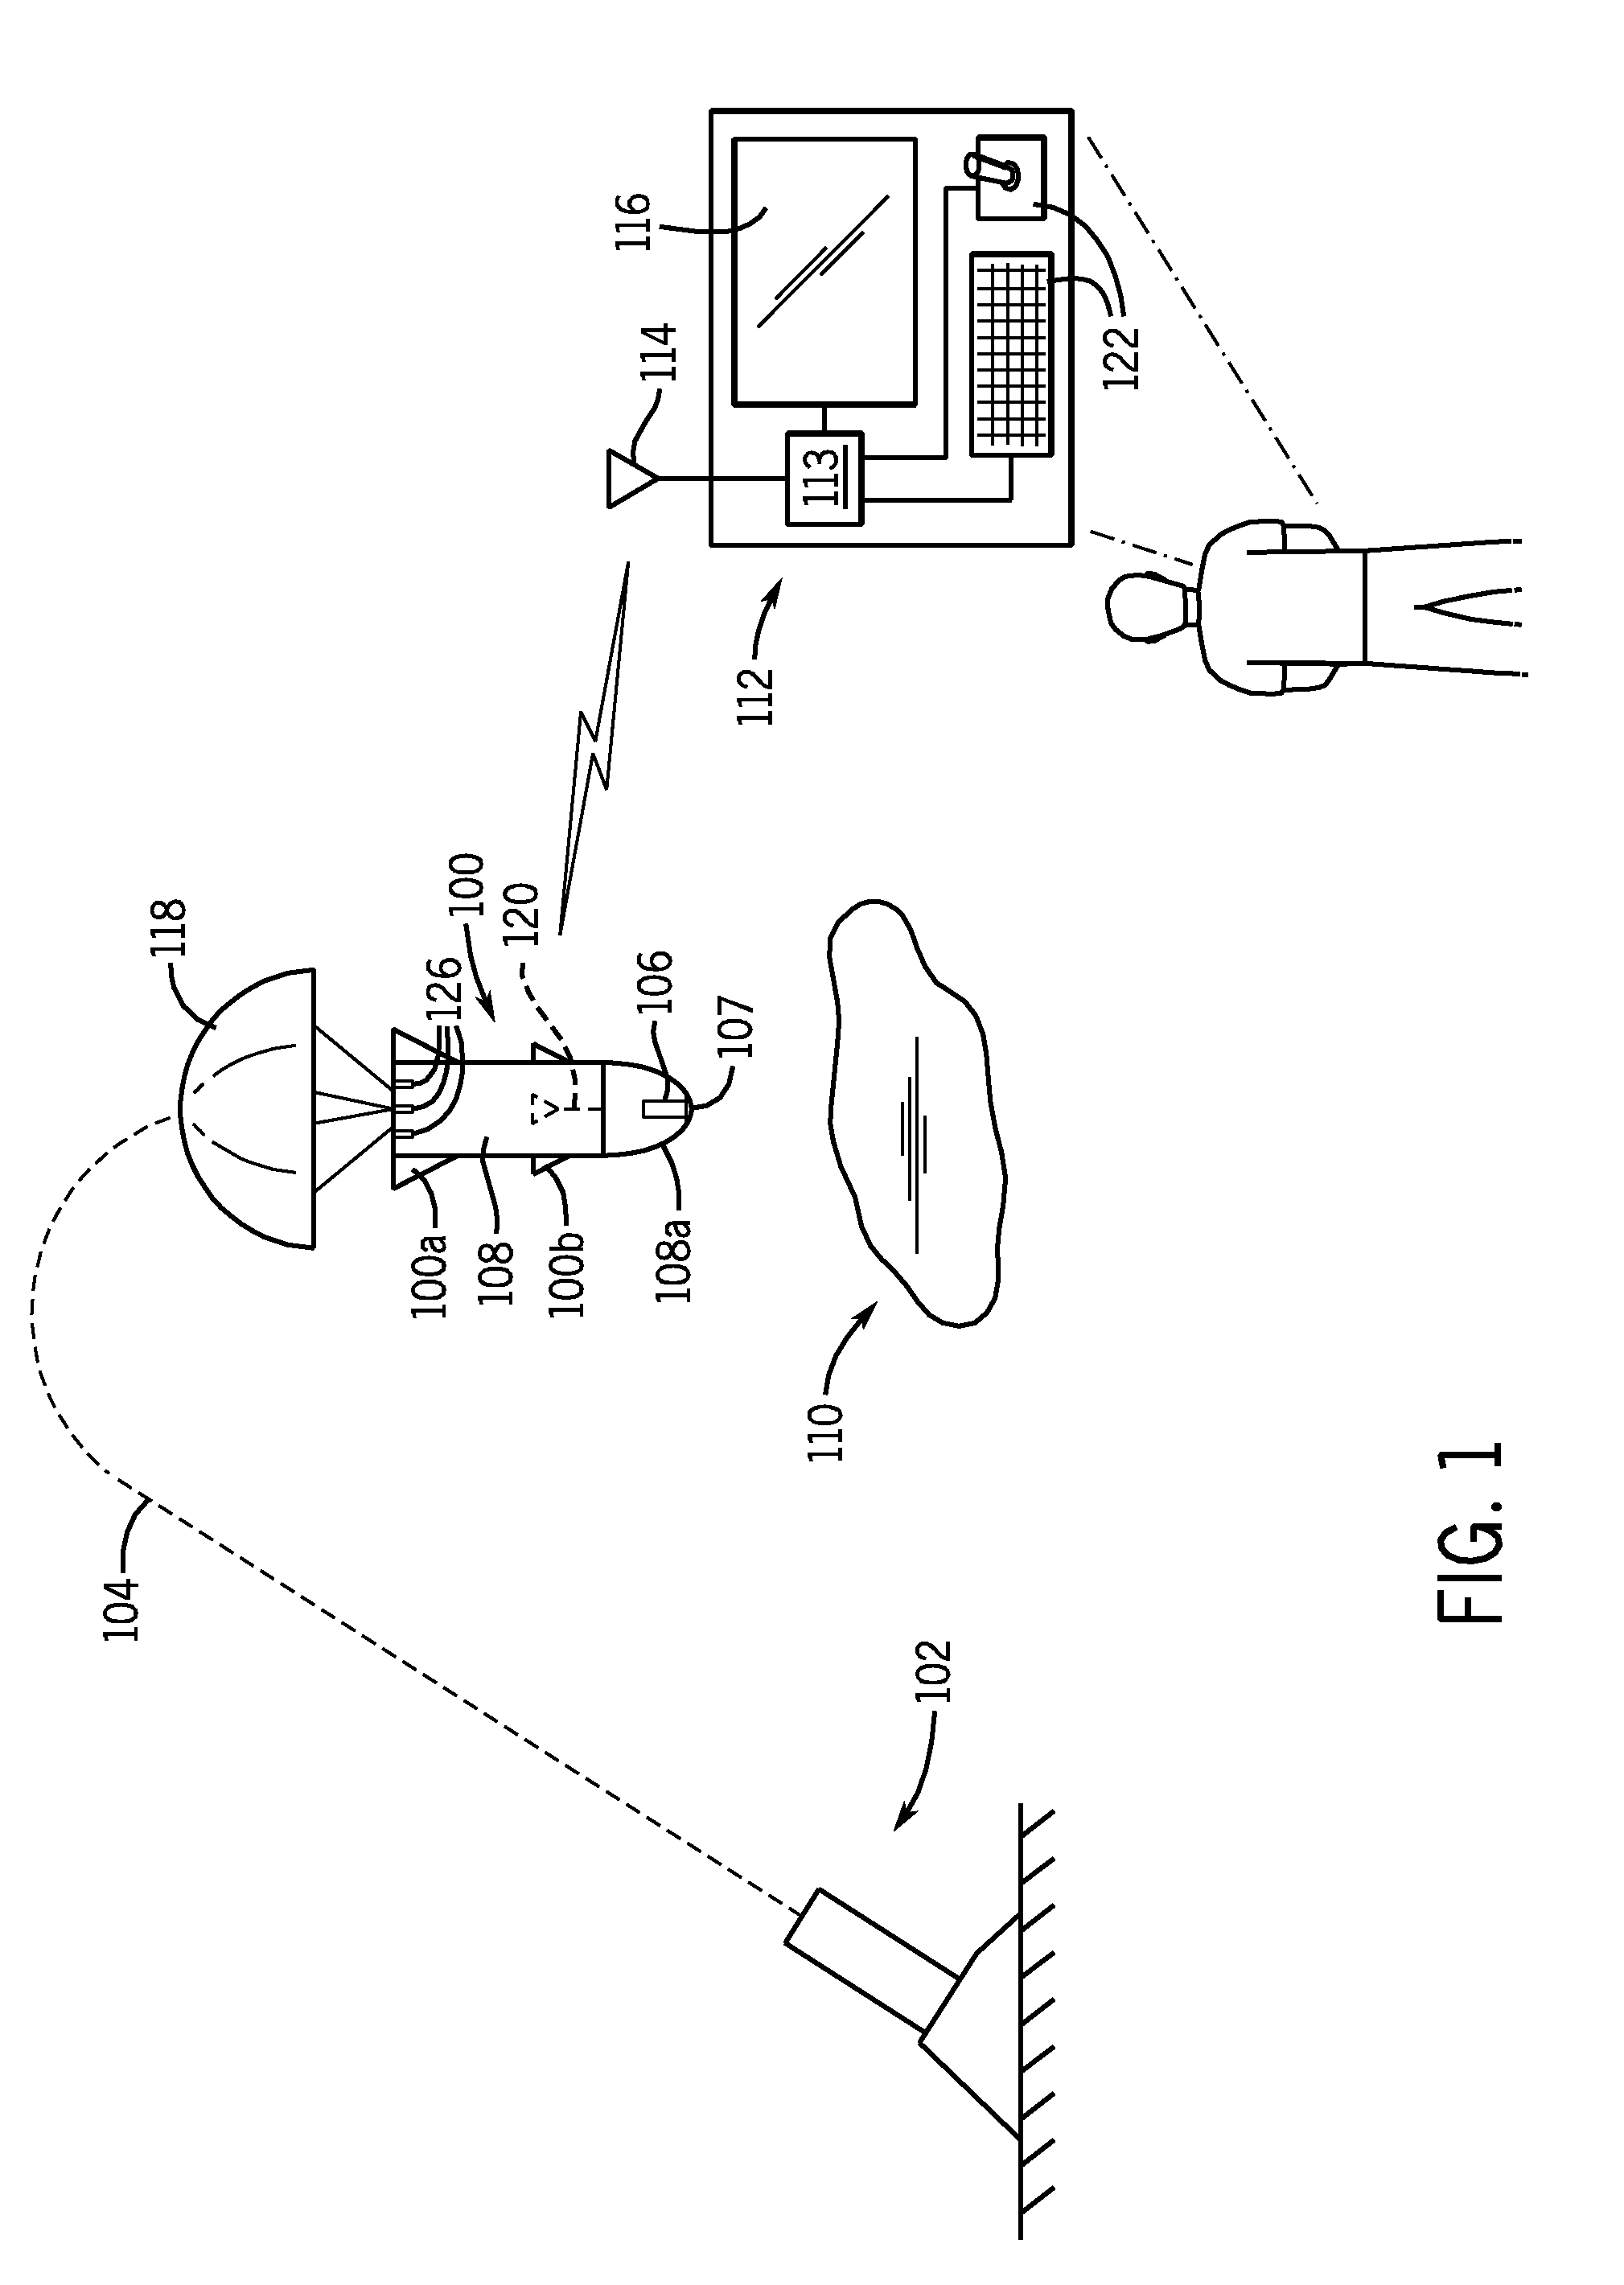 Method For Displaying Successive Image Frames on a Display to Stabilize the Display of a Selected Feature in the Image Frames